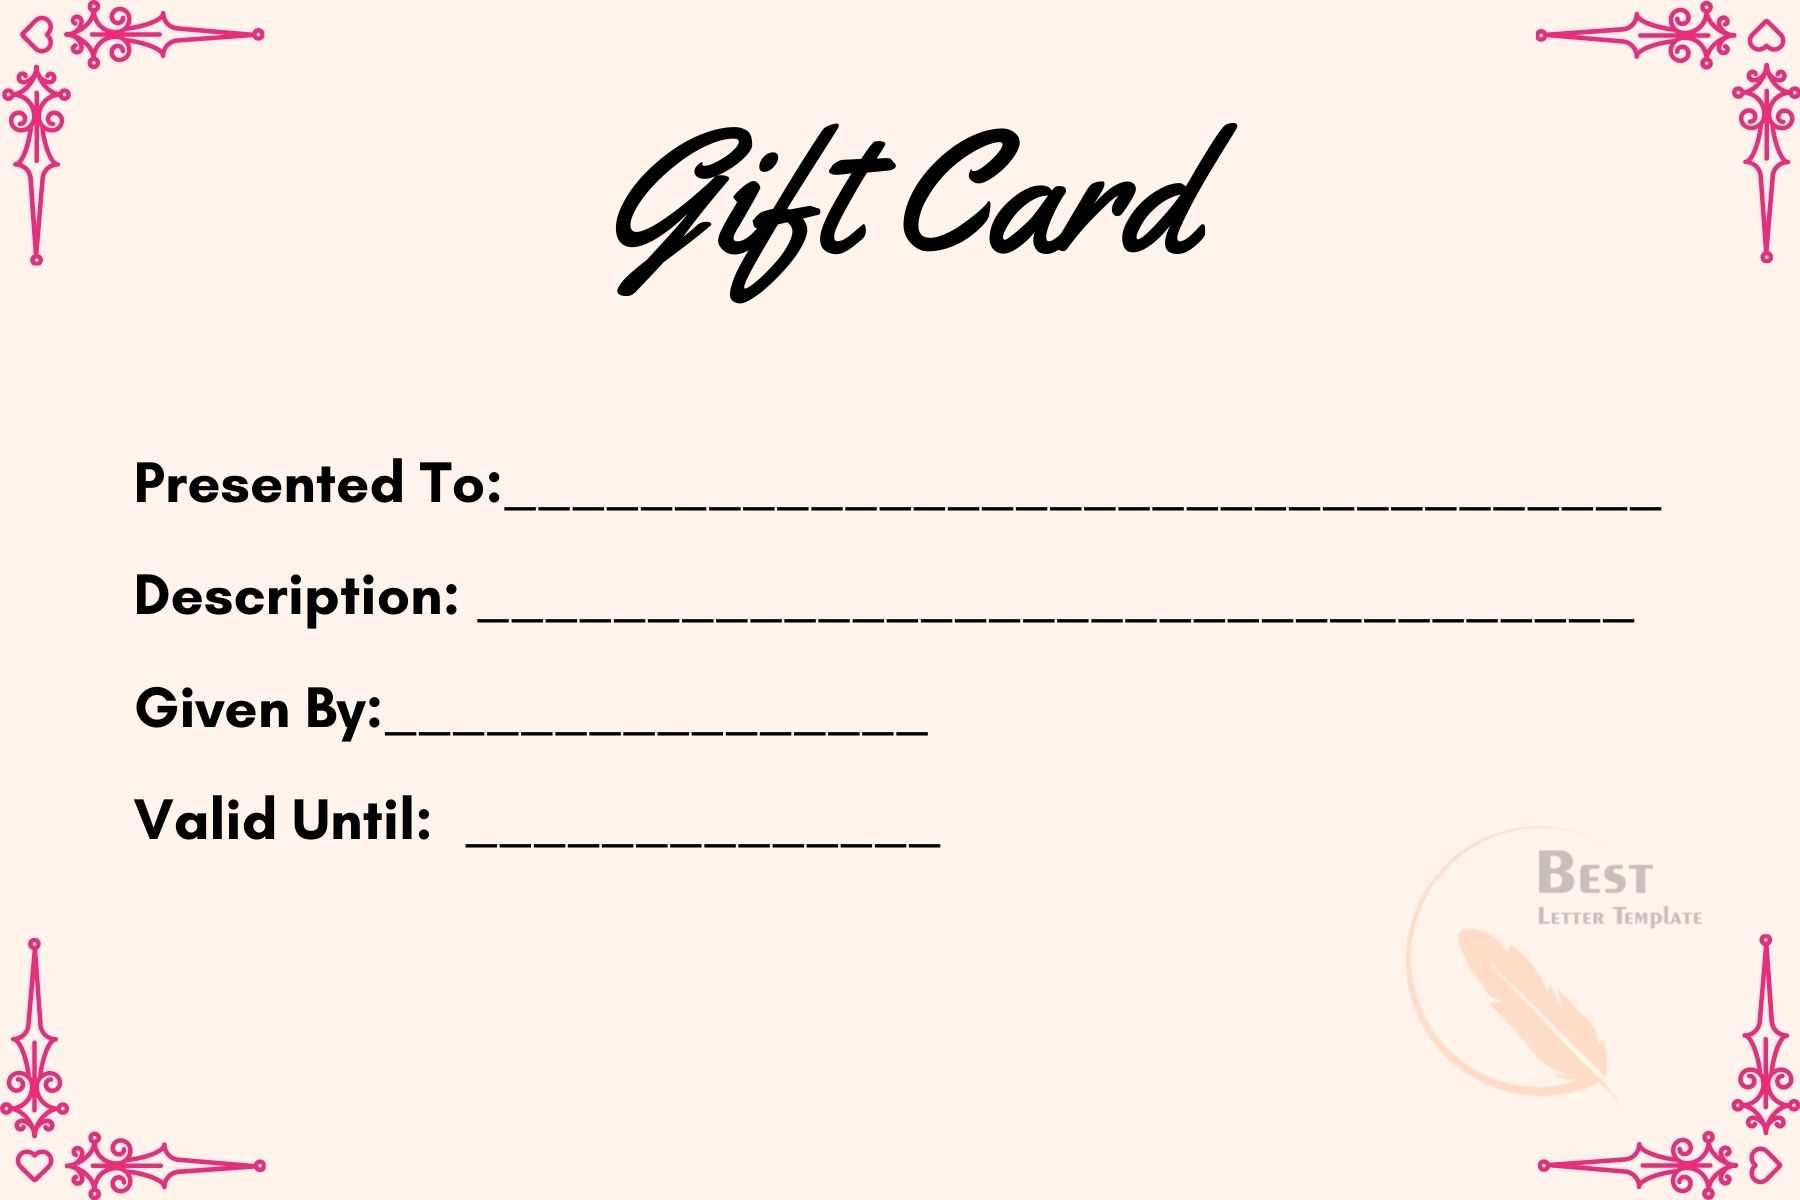 gift card free template download